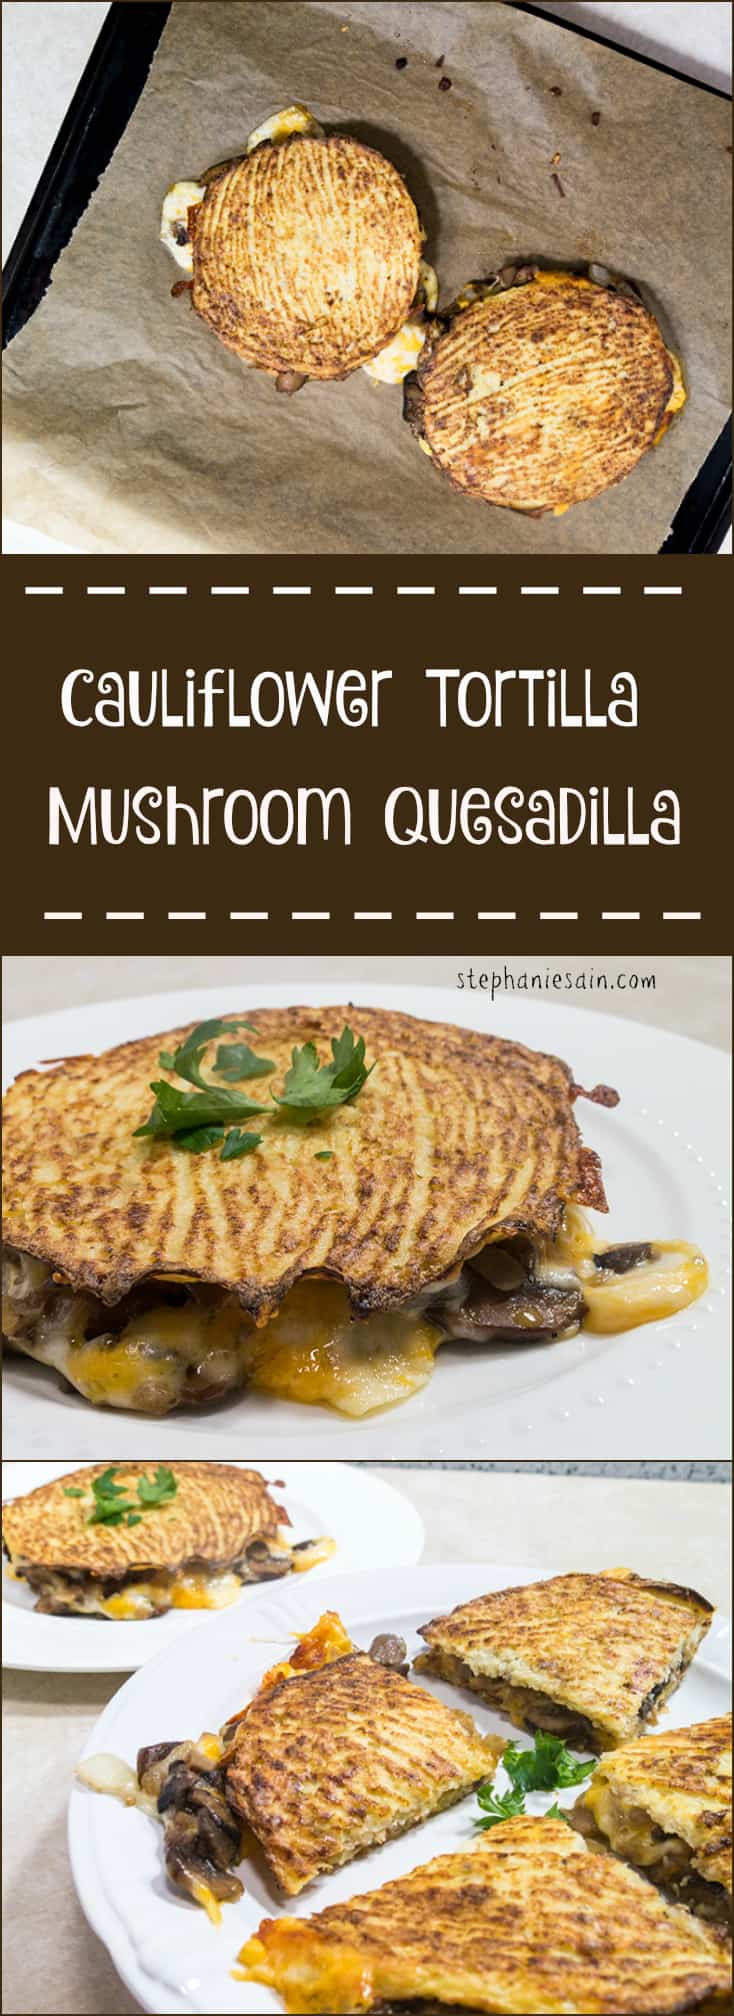 Cauliflower Tortilla Mushroom Quesadilla is a healthy tortilla made from cauliflower and then loaded with lots of mushrooms and cheese. Vegetarian and Gluten Free.